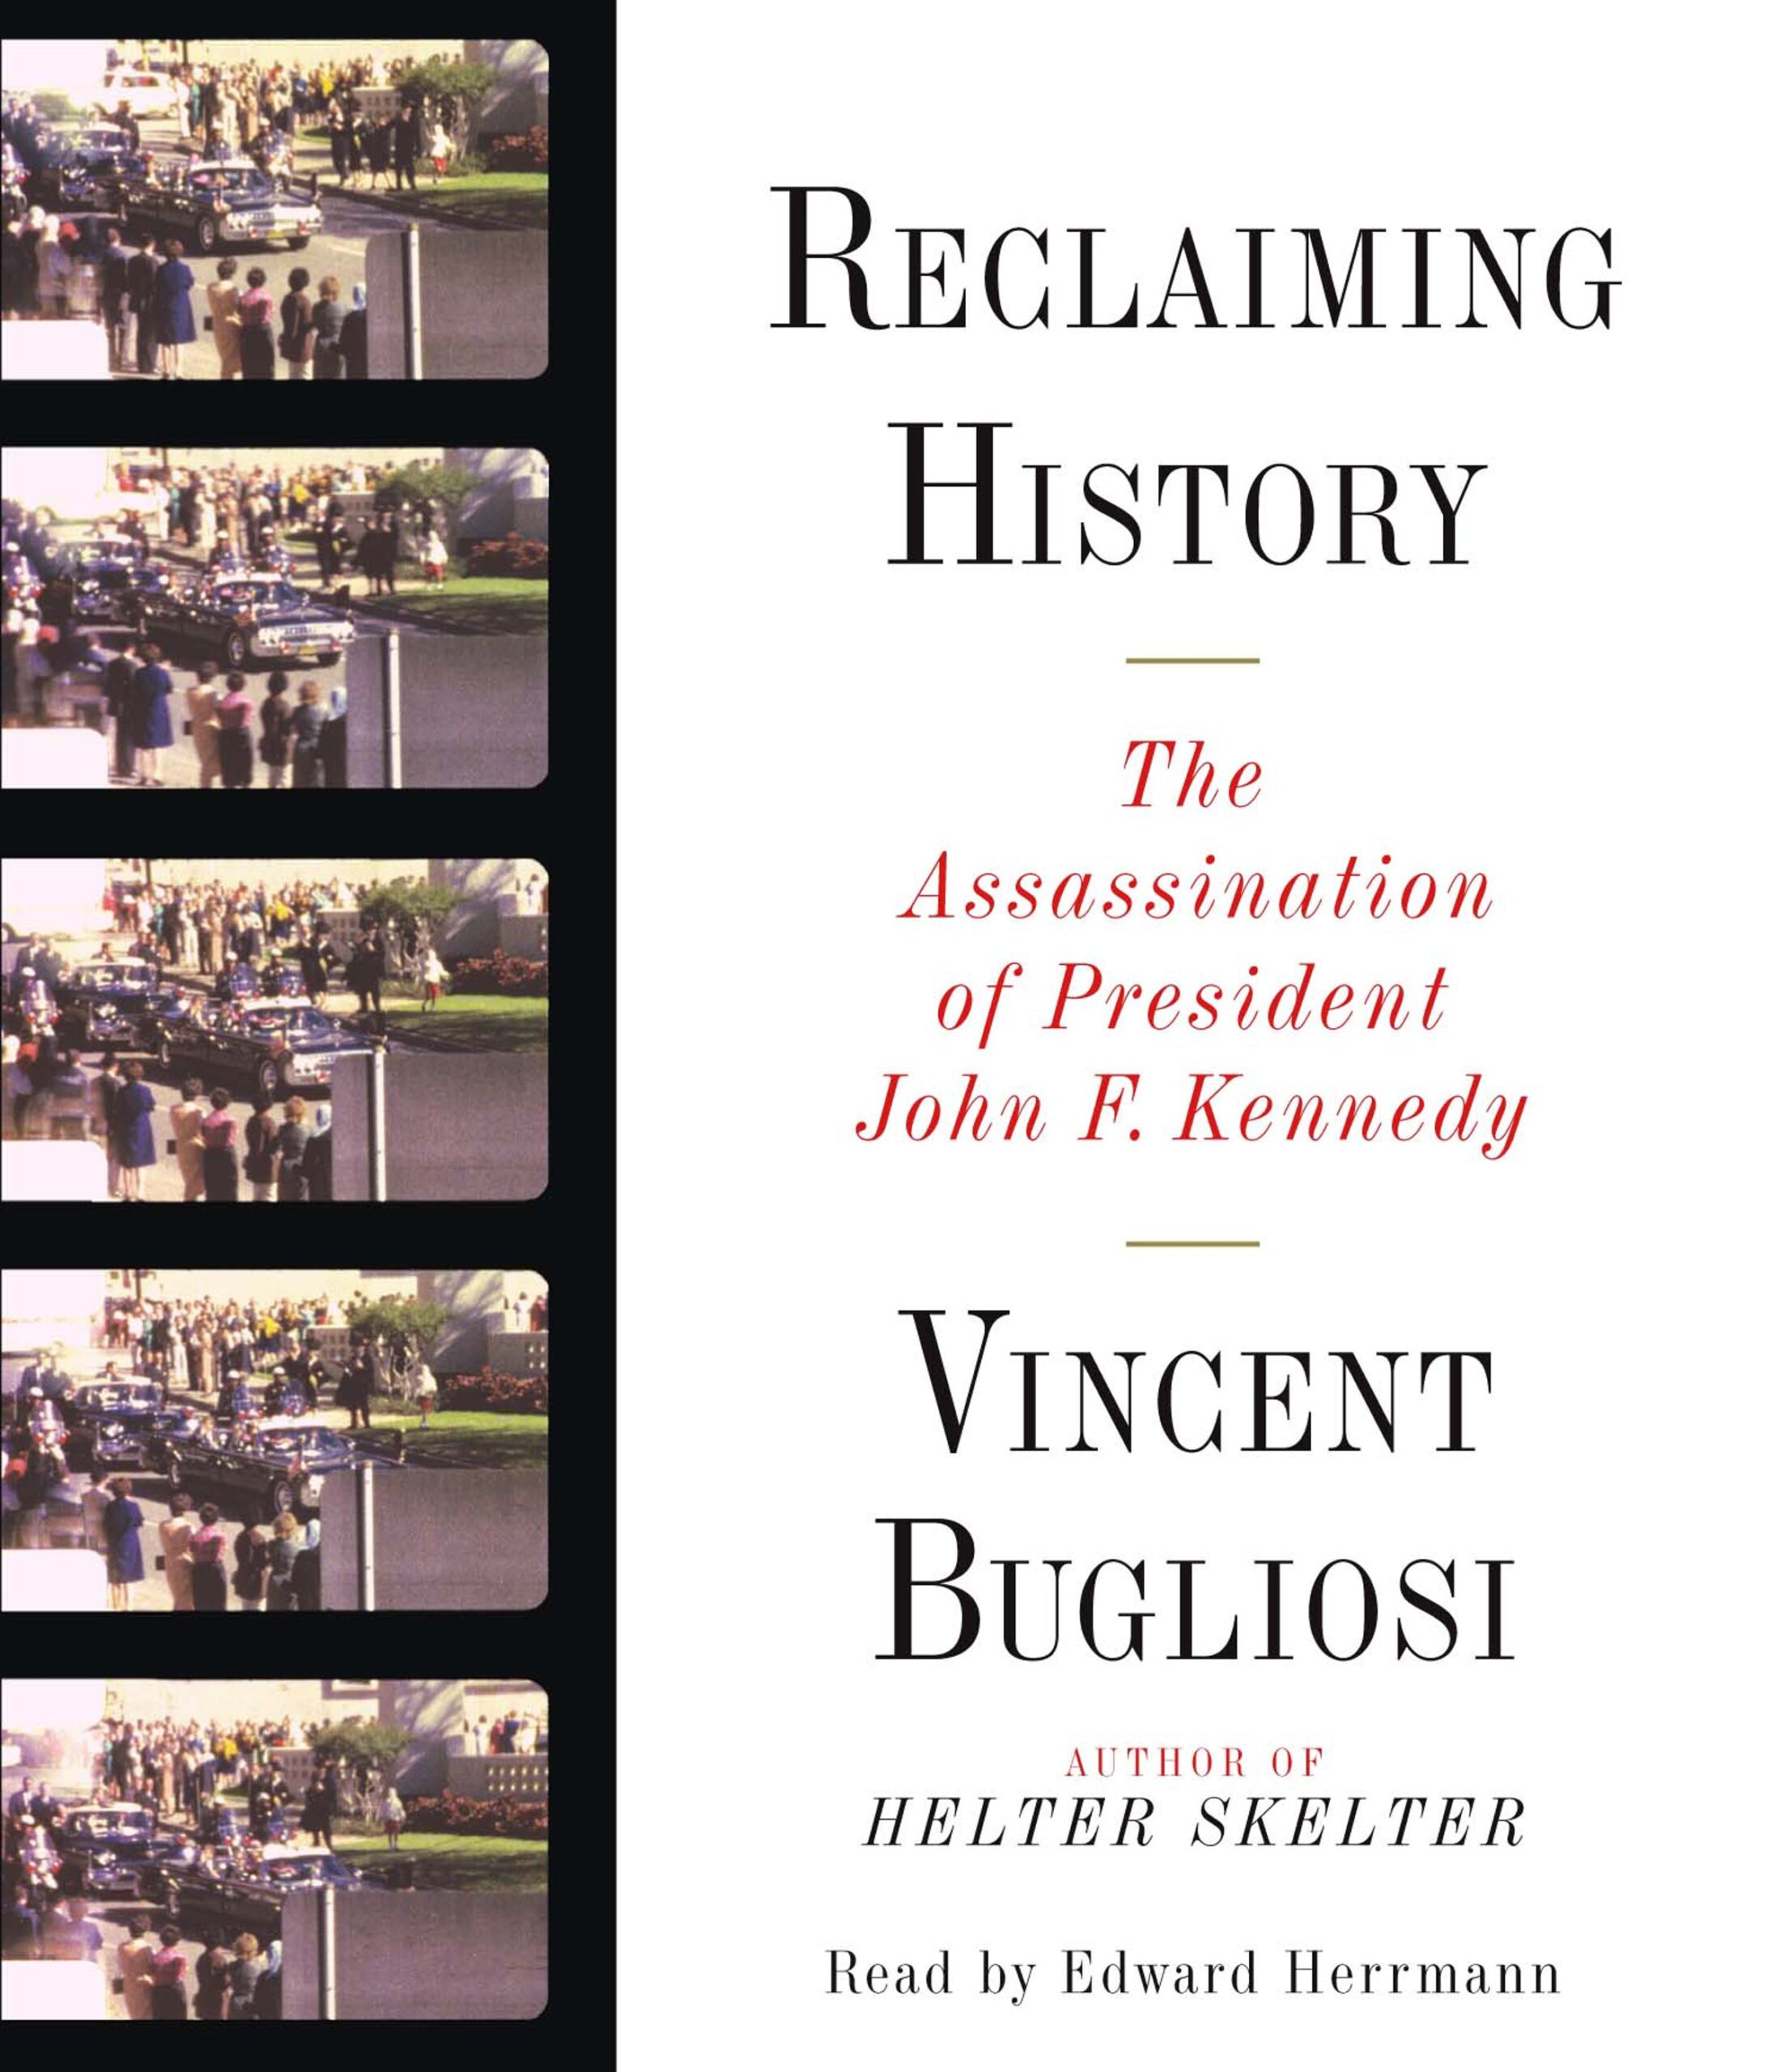 Reclaiming History by Vincent Bugliosi